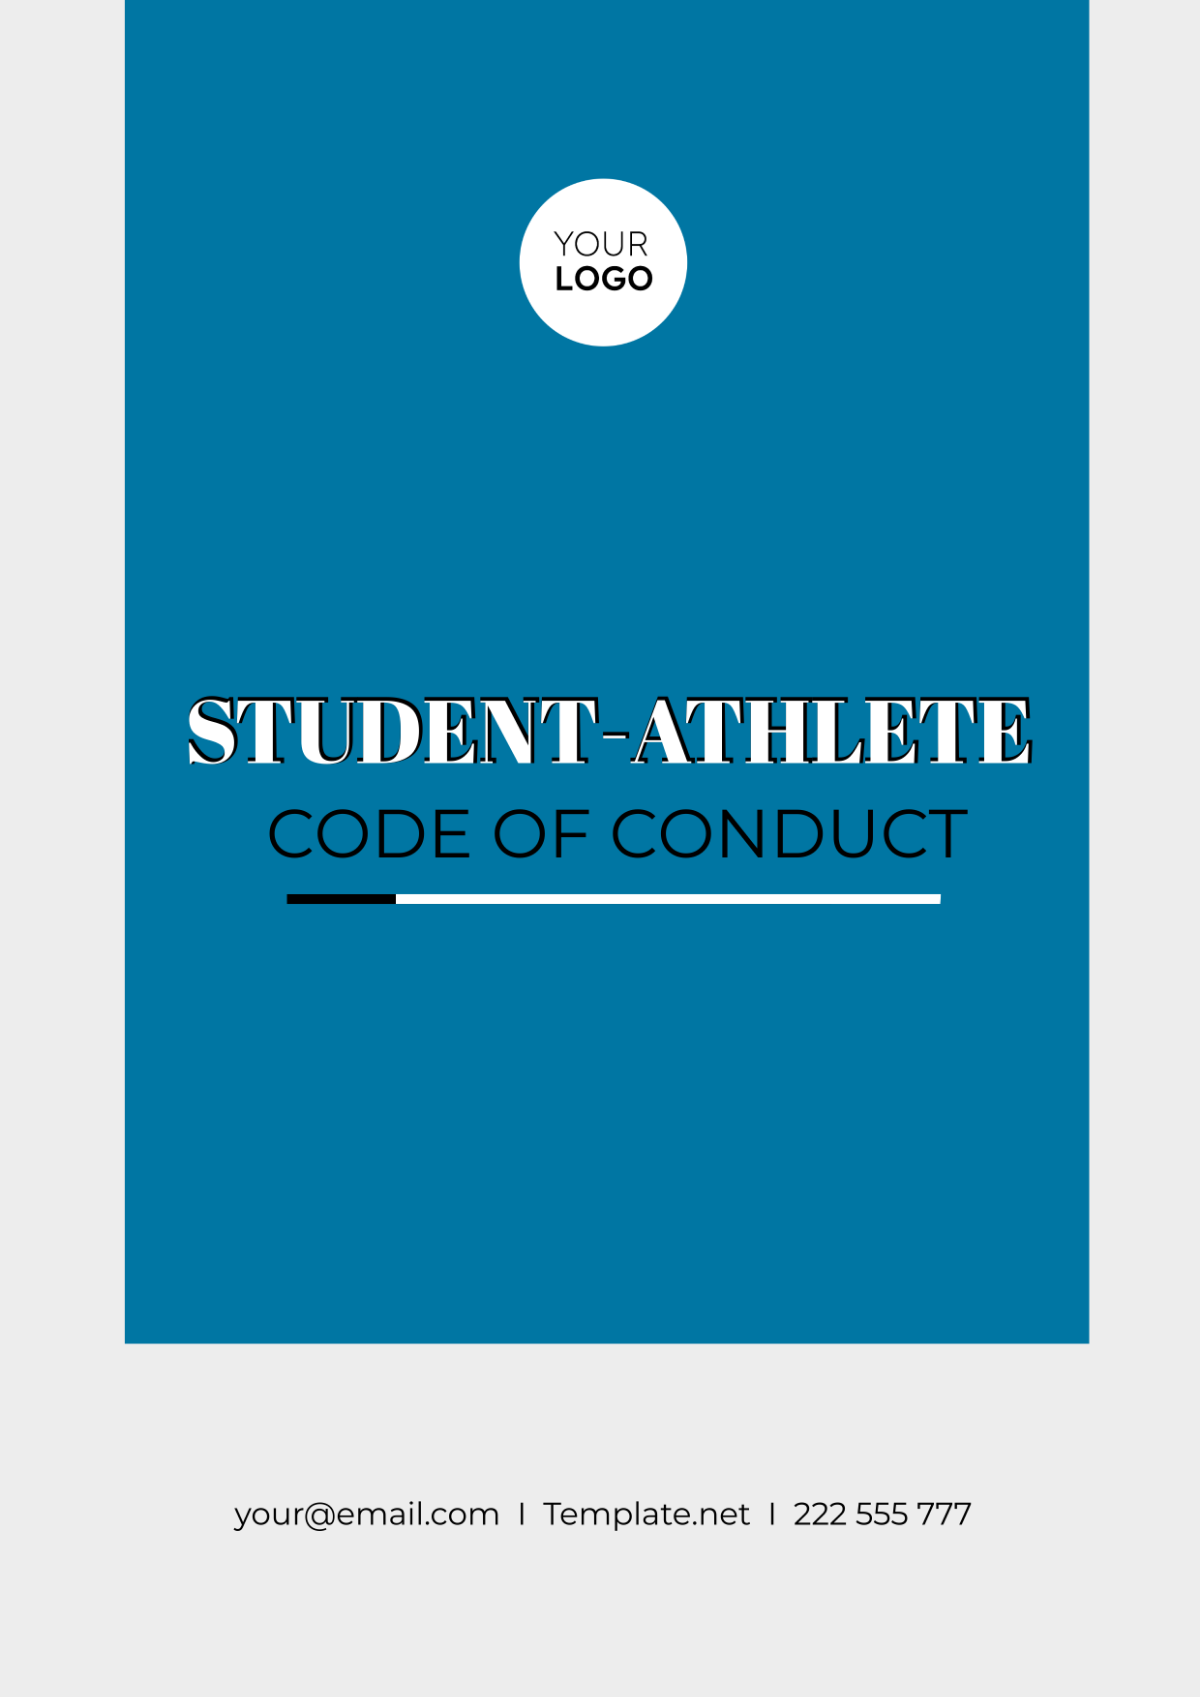 Free Student-Athlete Code of Conduct Template